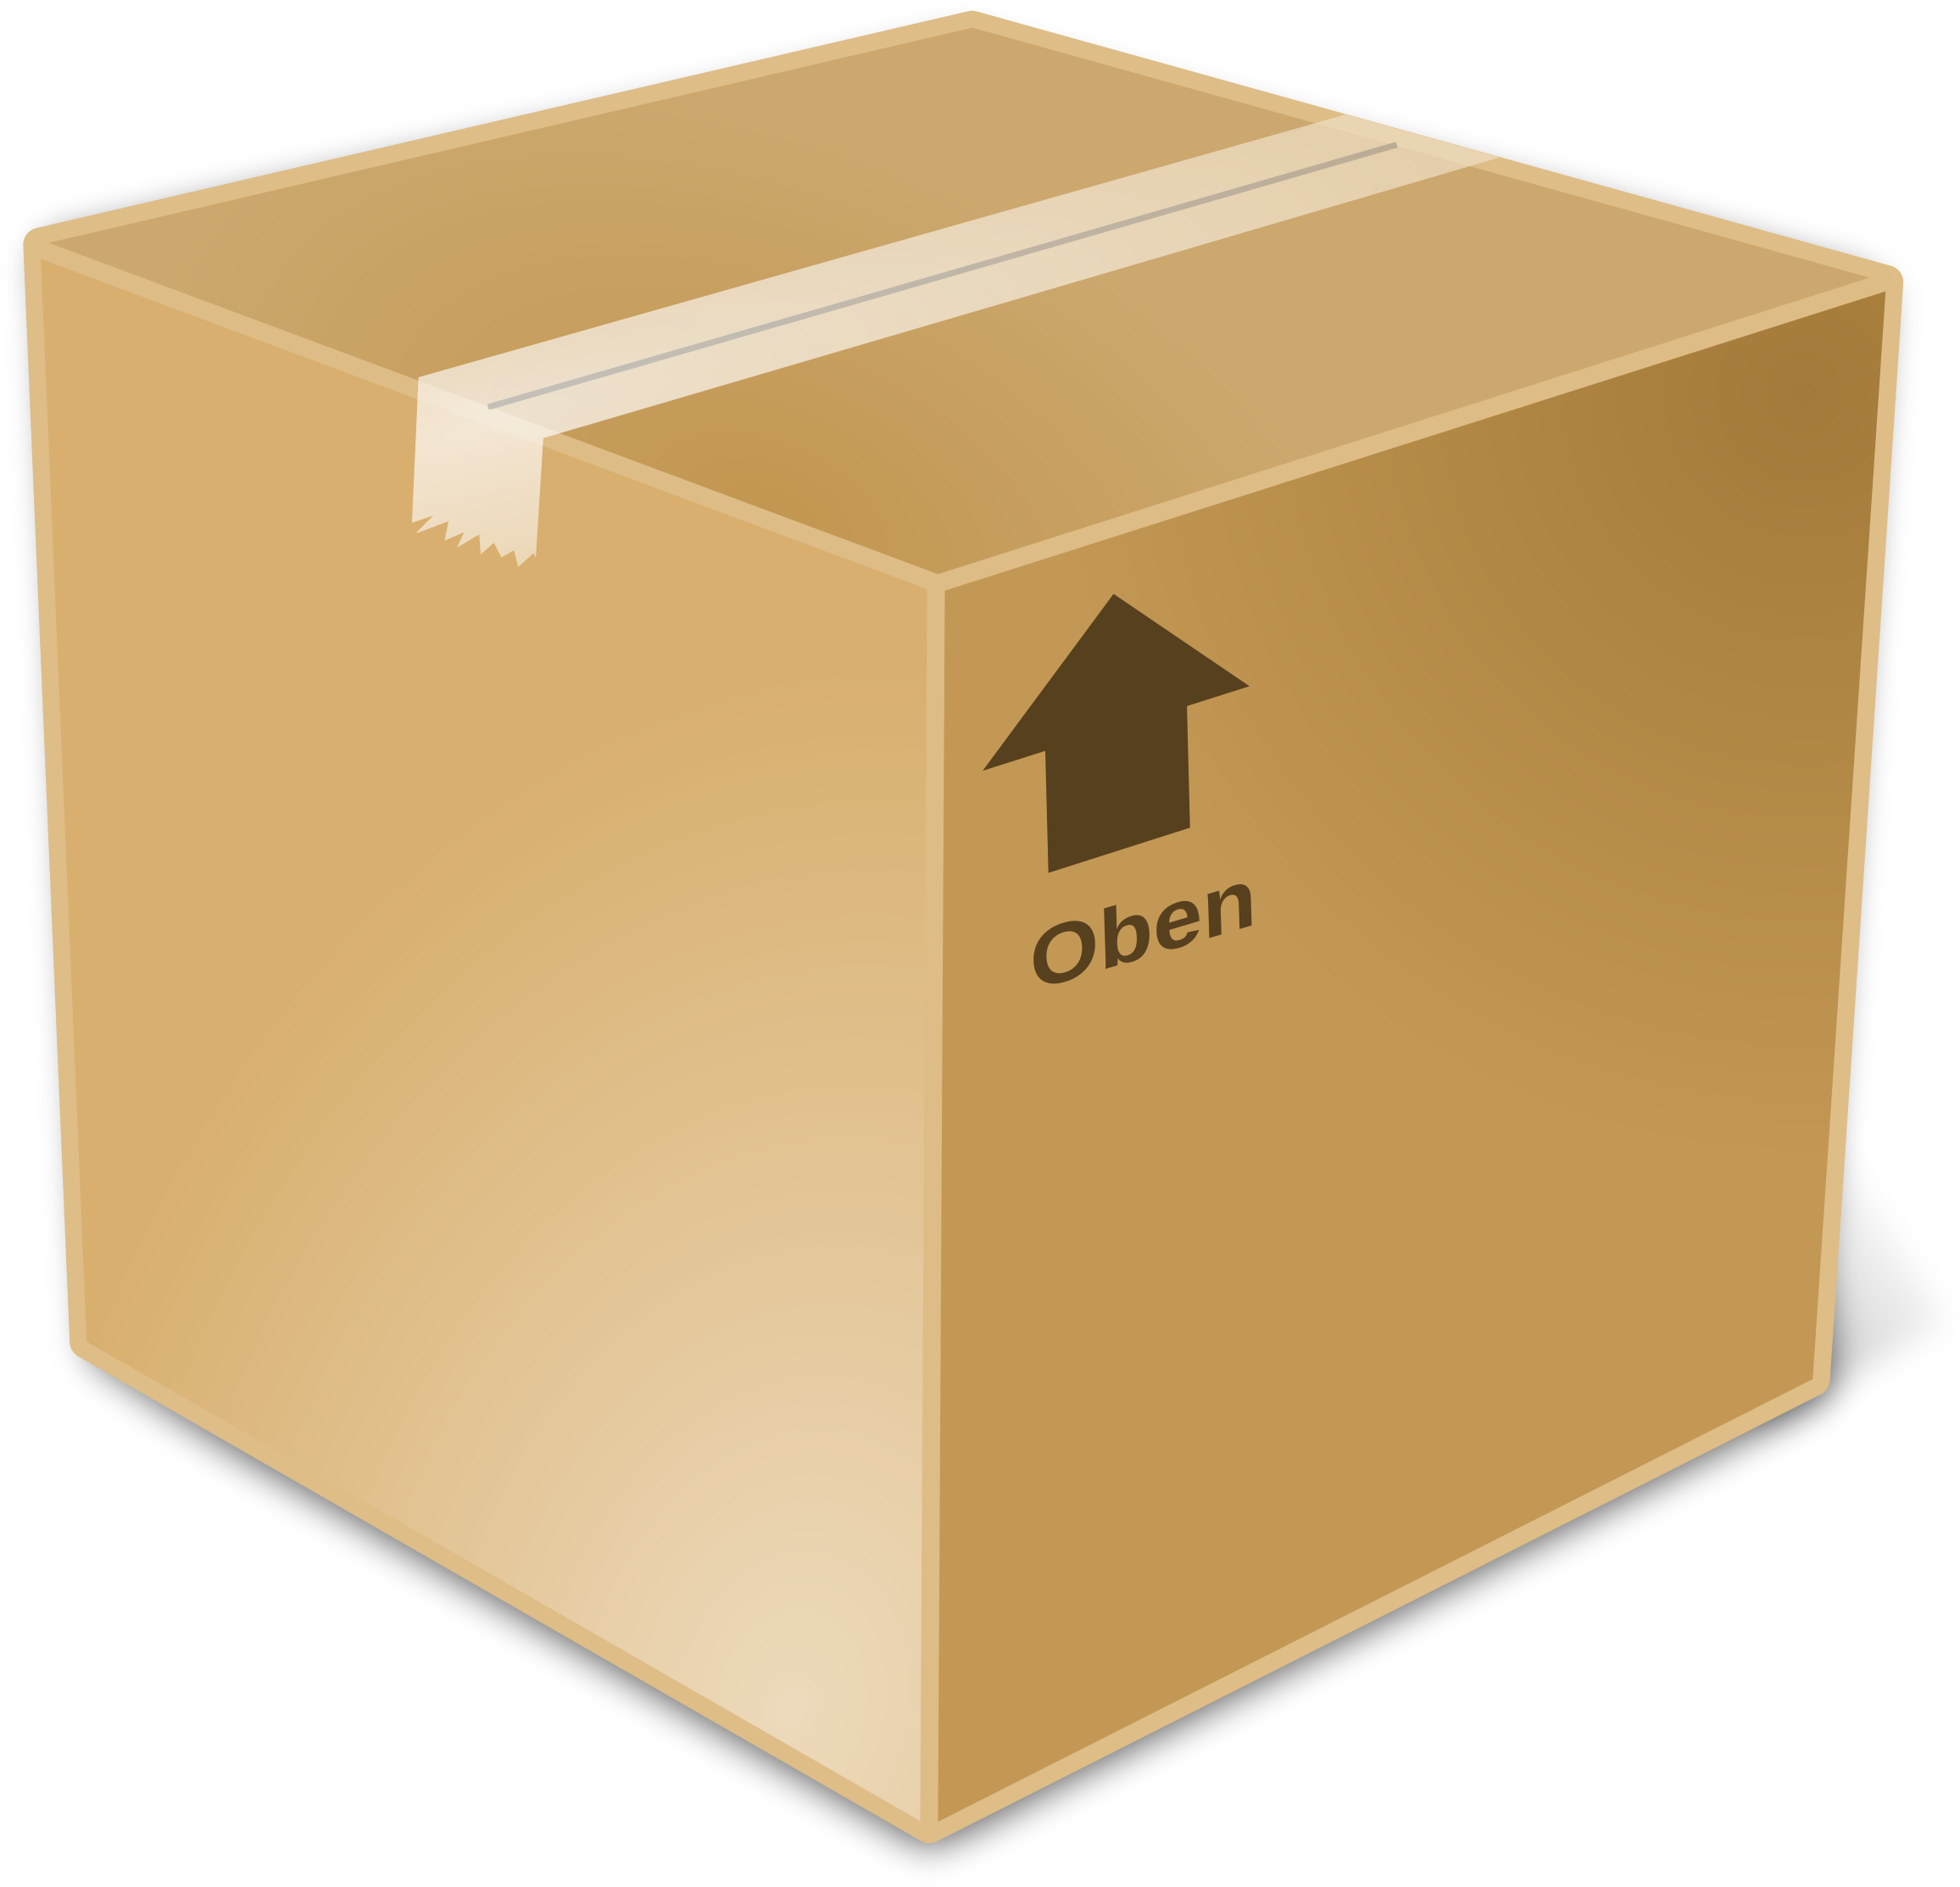 Box clipart packaging, Box packaging Transparent FREE for